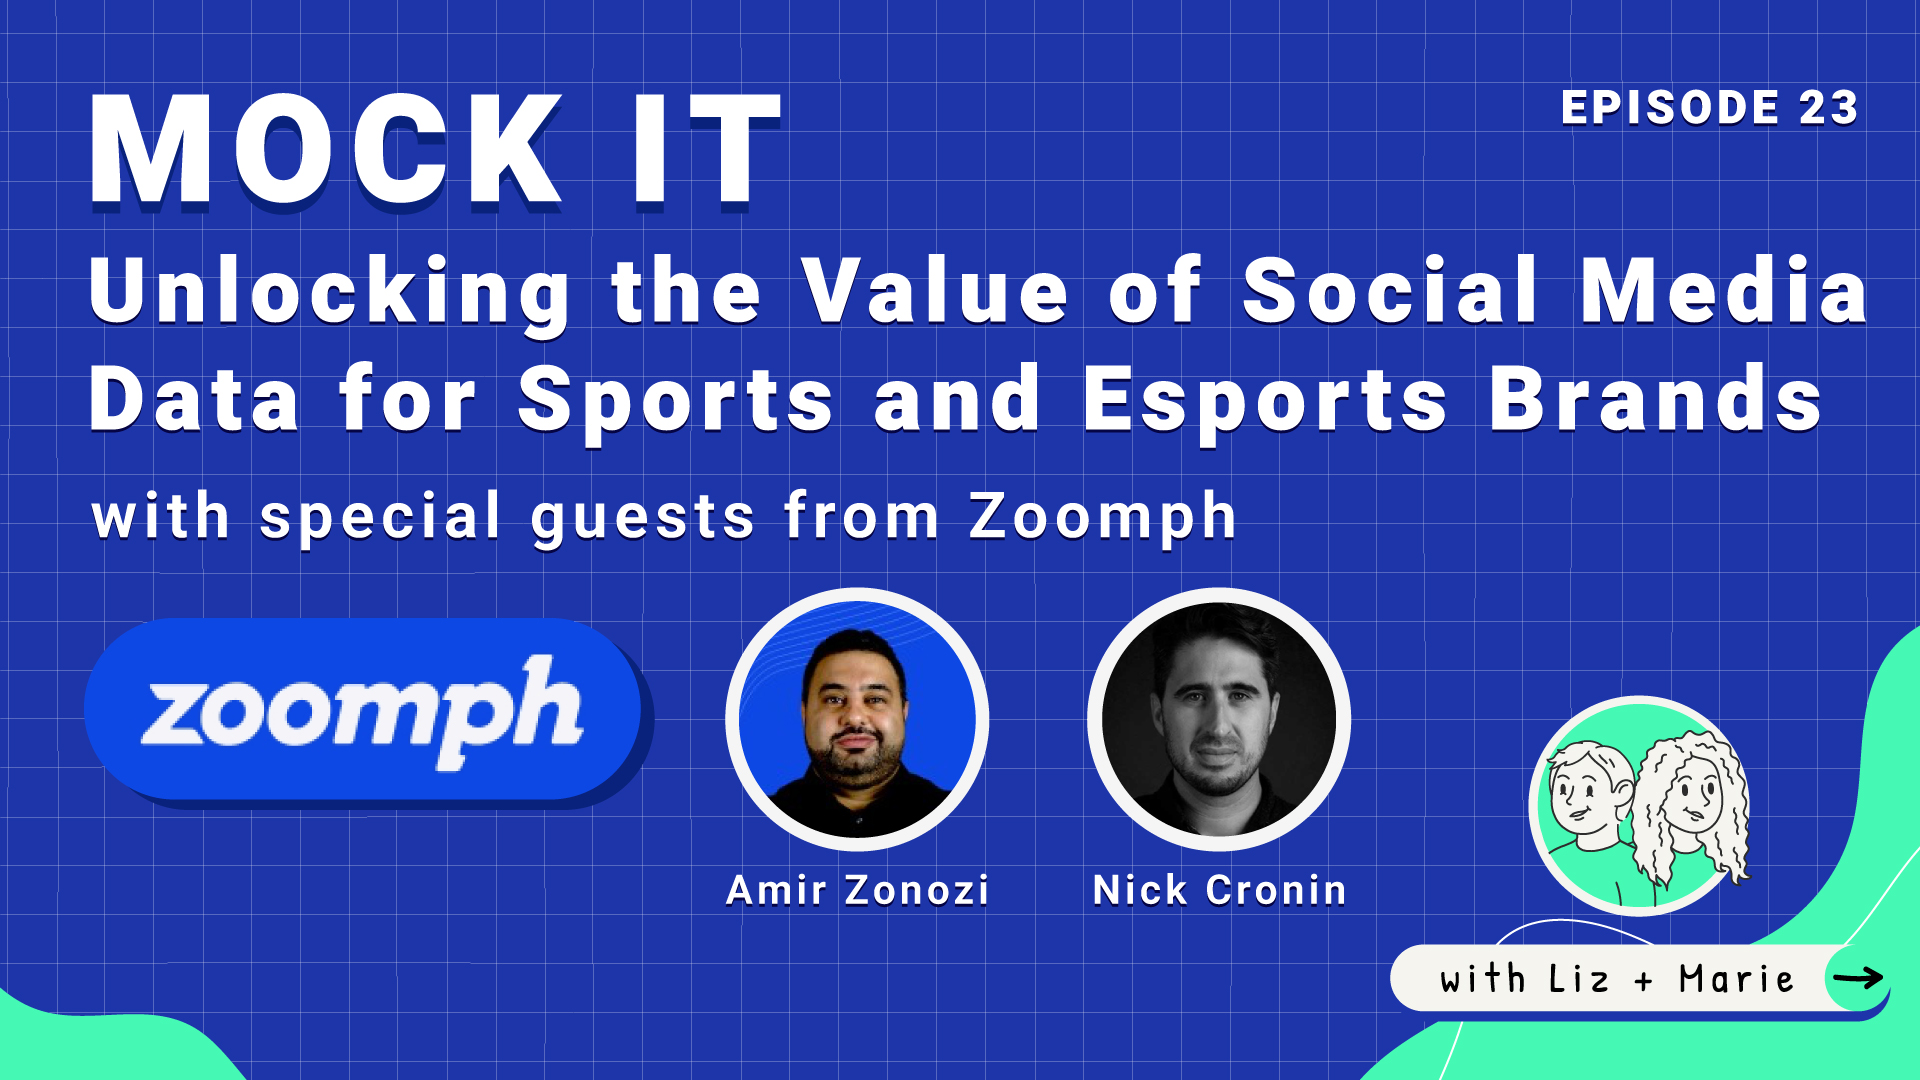 Zoomph's Approach to Hiring Women in Esports and Tech